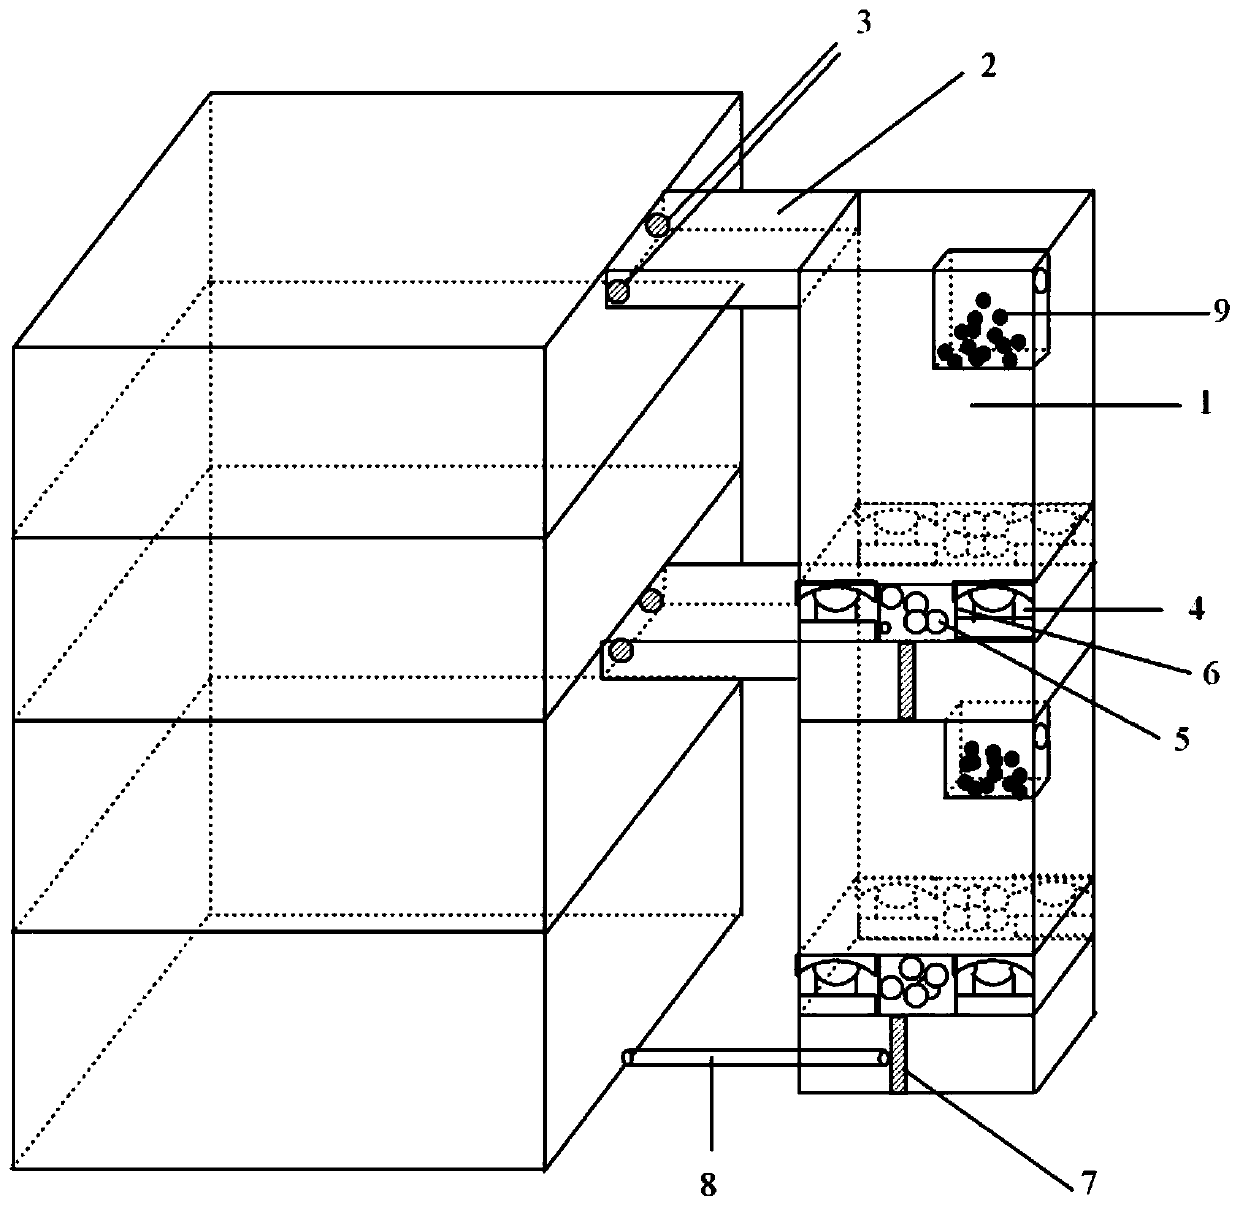 Pendulum type external elevator shaft system with multi-stage frequency modulation function